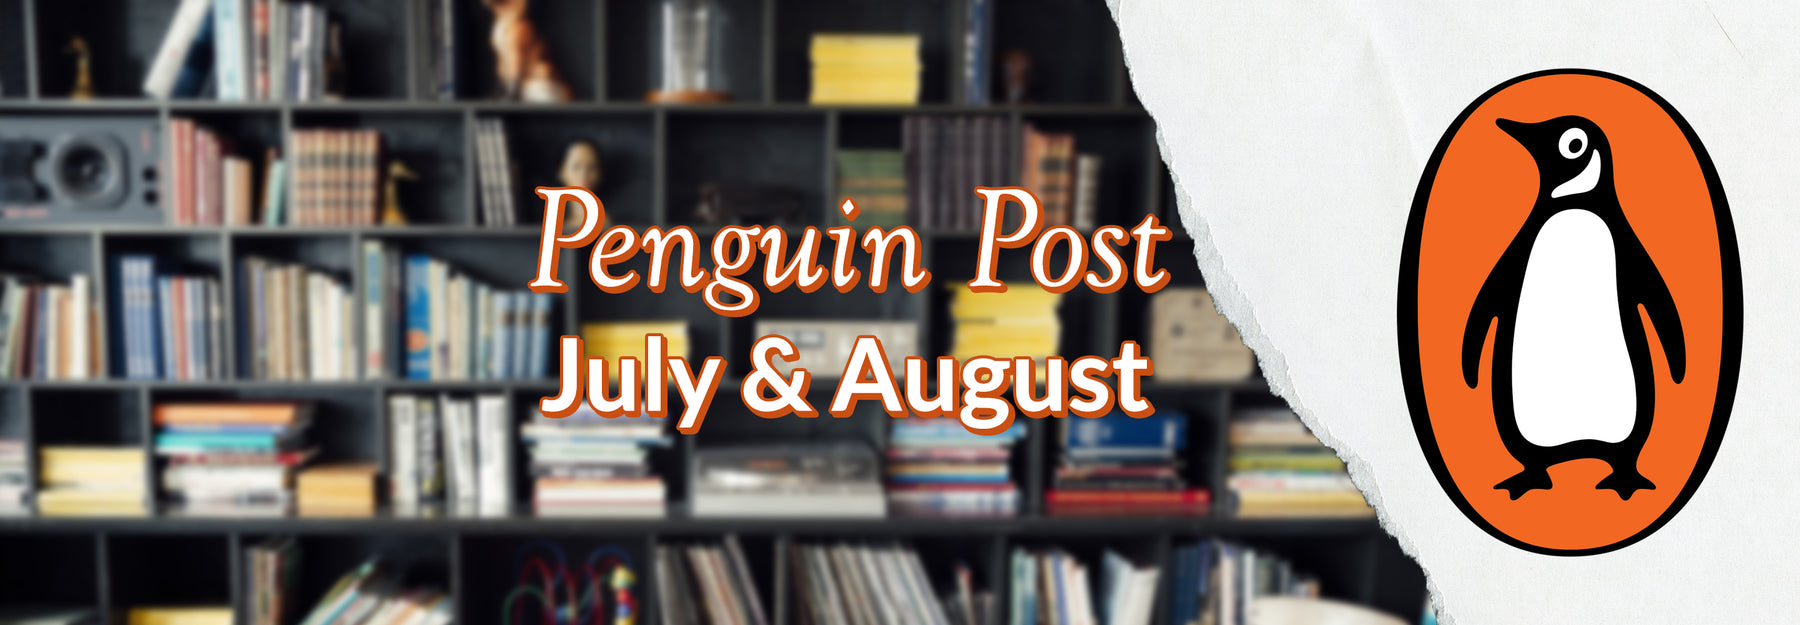 Wordsworth Special Edition of the Penguin Post for July/August